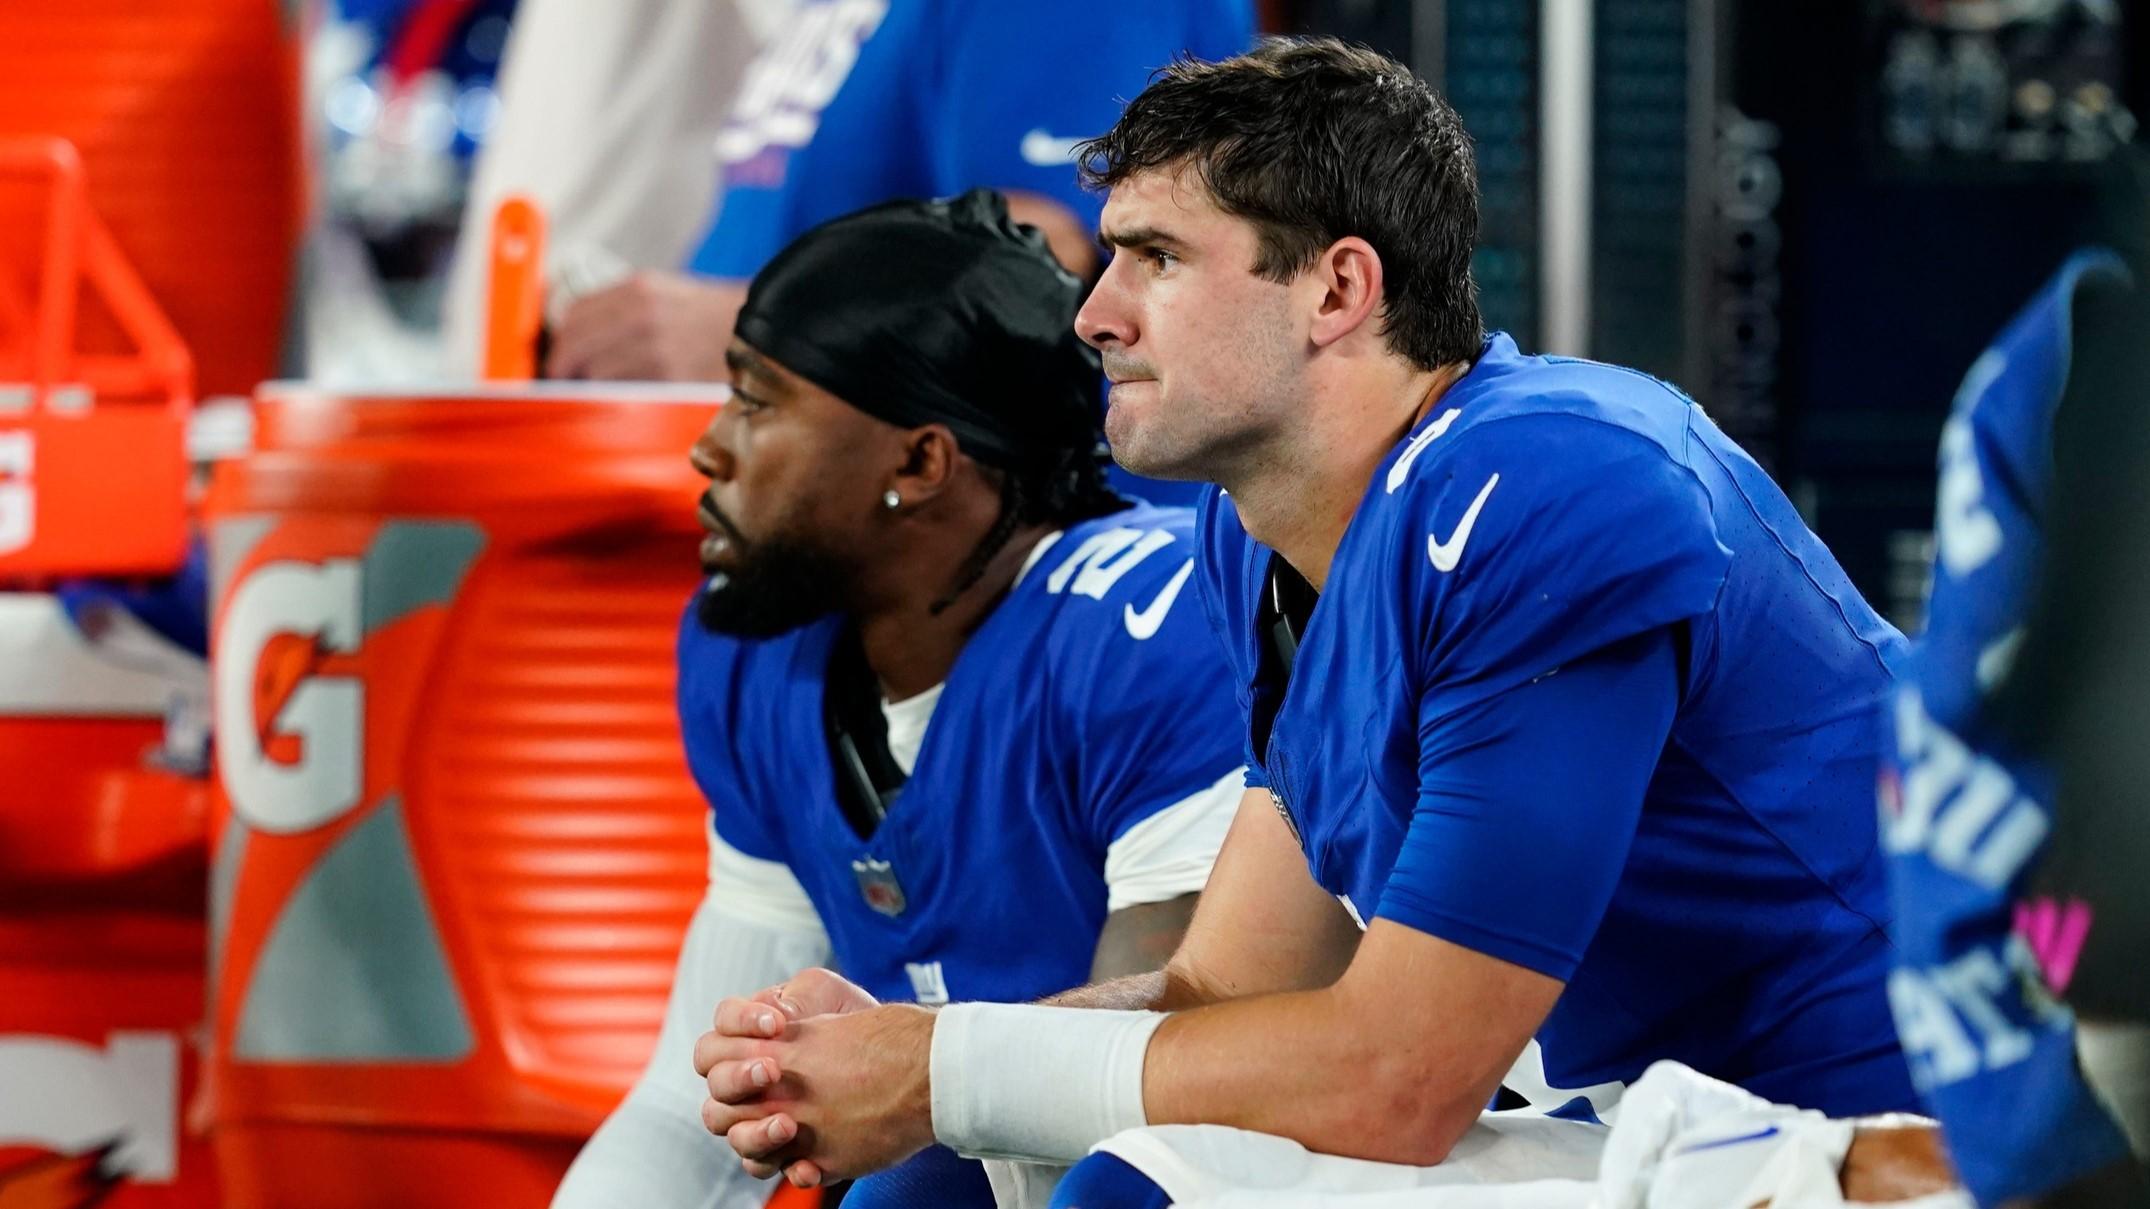 New York Giants quarterback Daniel Jones, right, sits with quarterback Tyrod Taylor (2) in the second half. The Seahawks defeat the Giants, 24-3, at MetLife Stadium on Monday, Oct. 2, 2023, in East Rutherford. / Danielle Parhizkaran/NorthJersey.com / USA TODAY NETWORK